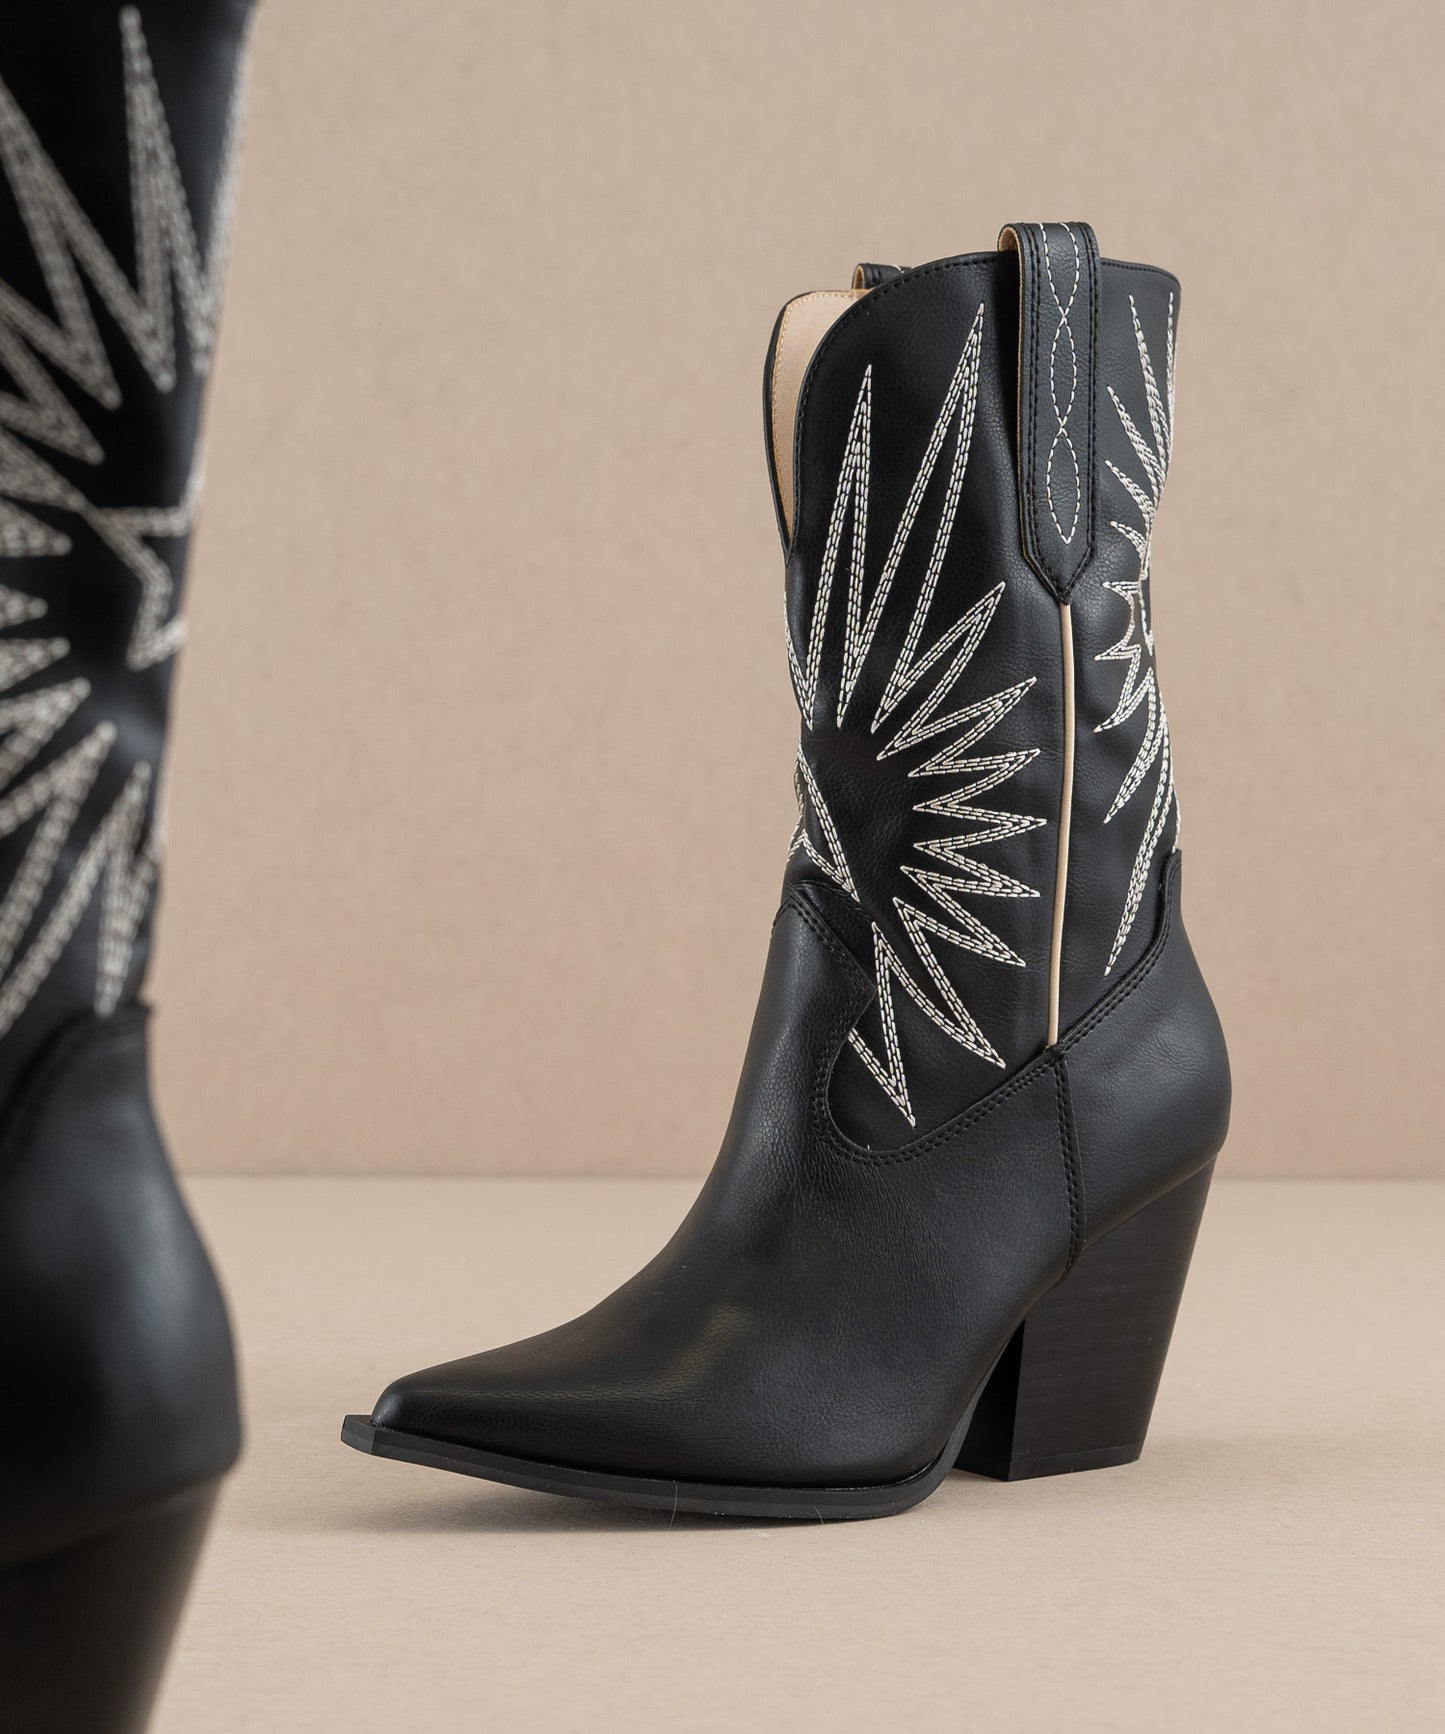 The Emersyn - Black Starburst Embroidery Boots